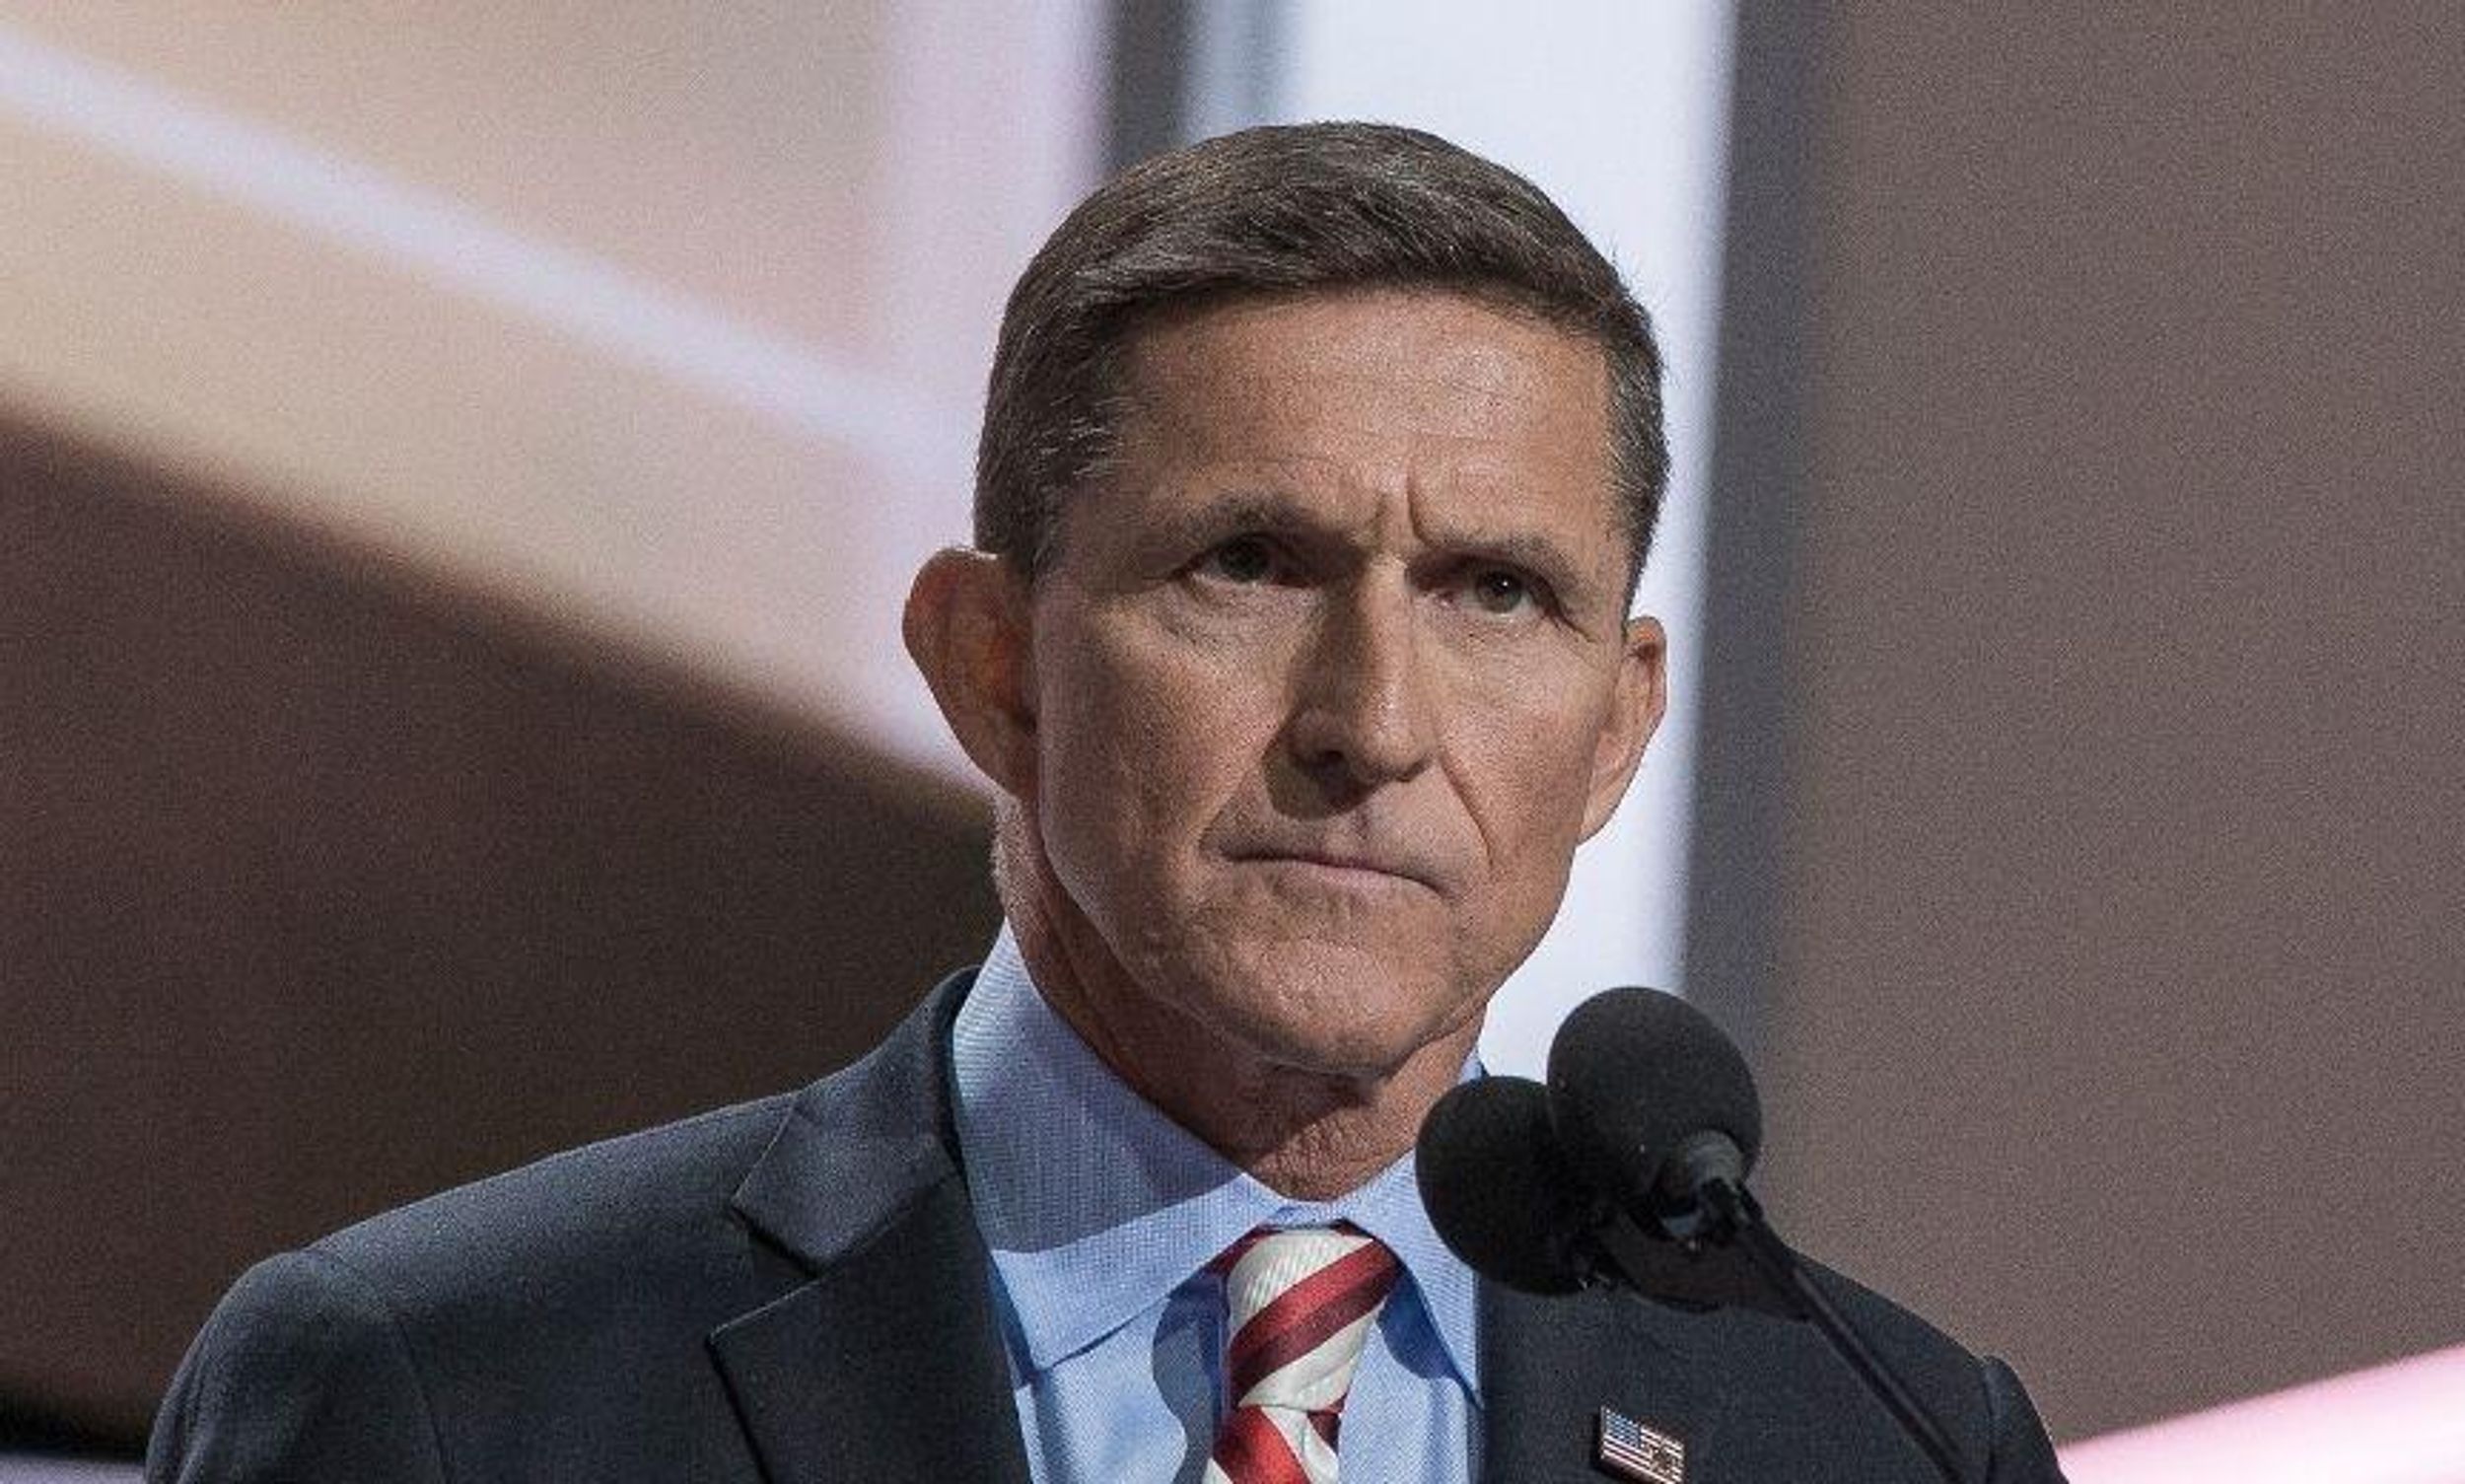 Mike Flynn Promotes Call for Trump to Declare 'Limited Martial Law' and Have Military Oversee Election Do-Over